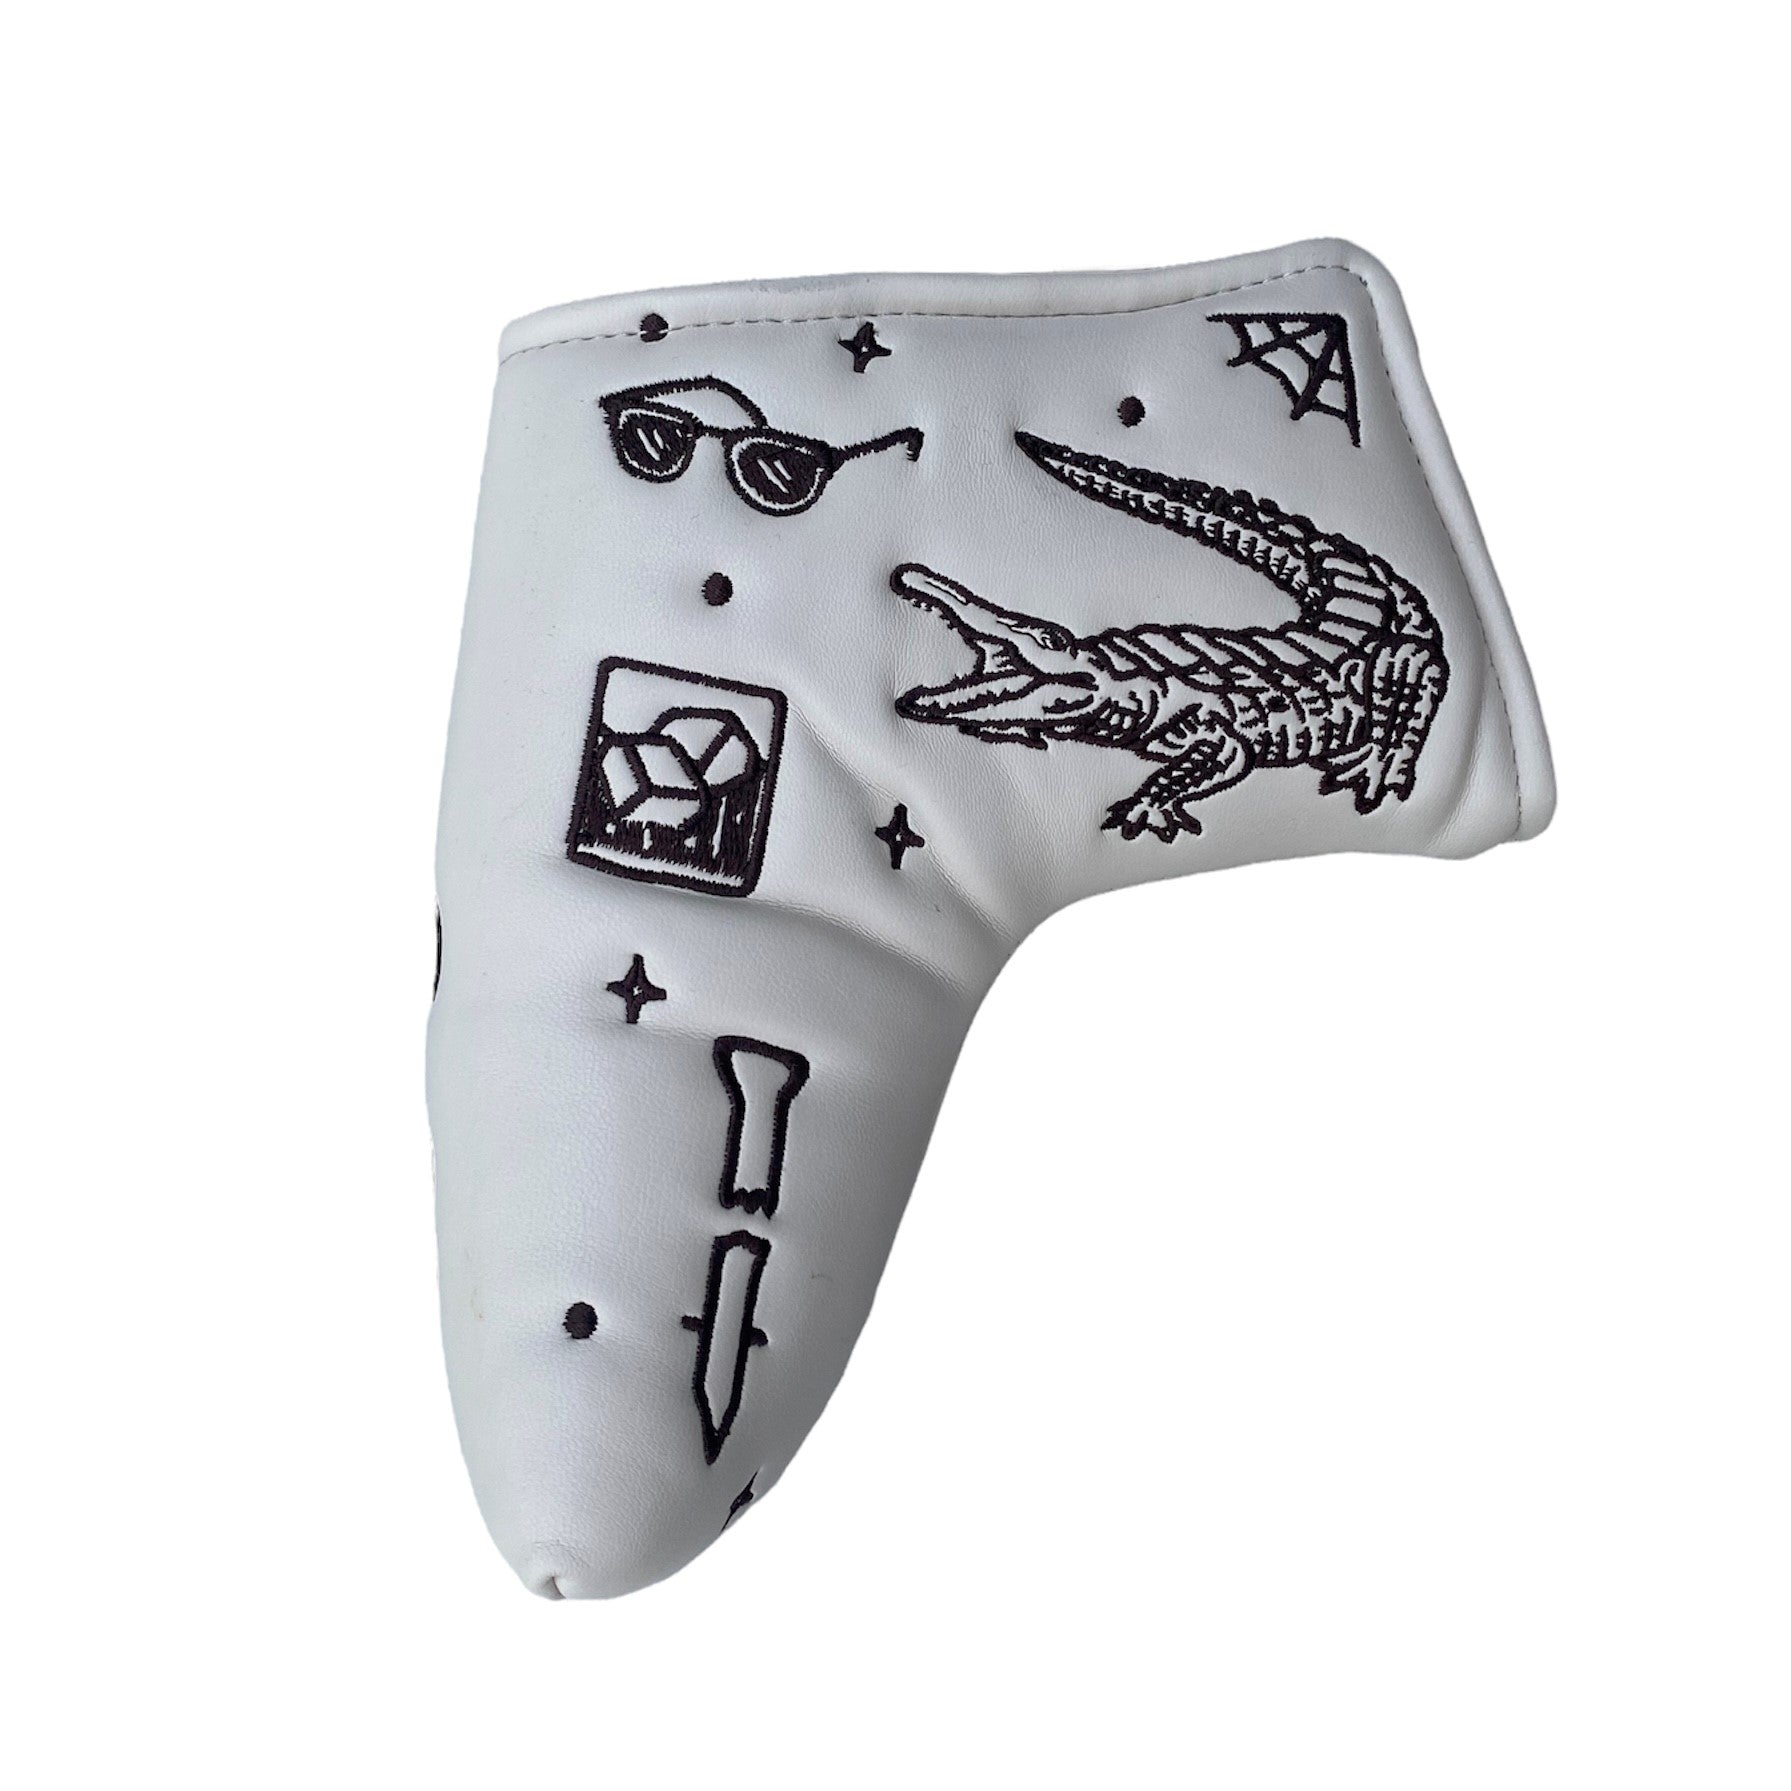 BLADE PUTTER COVER